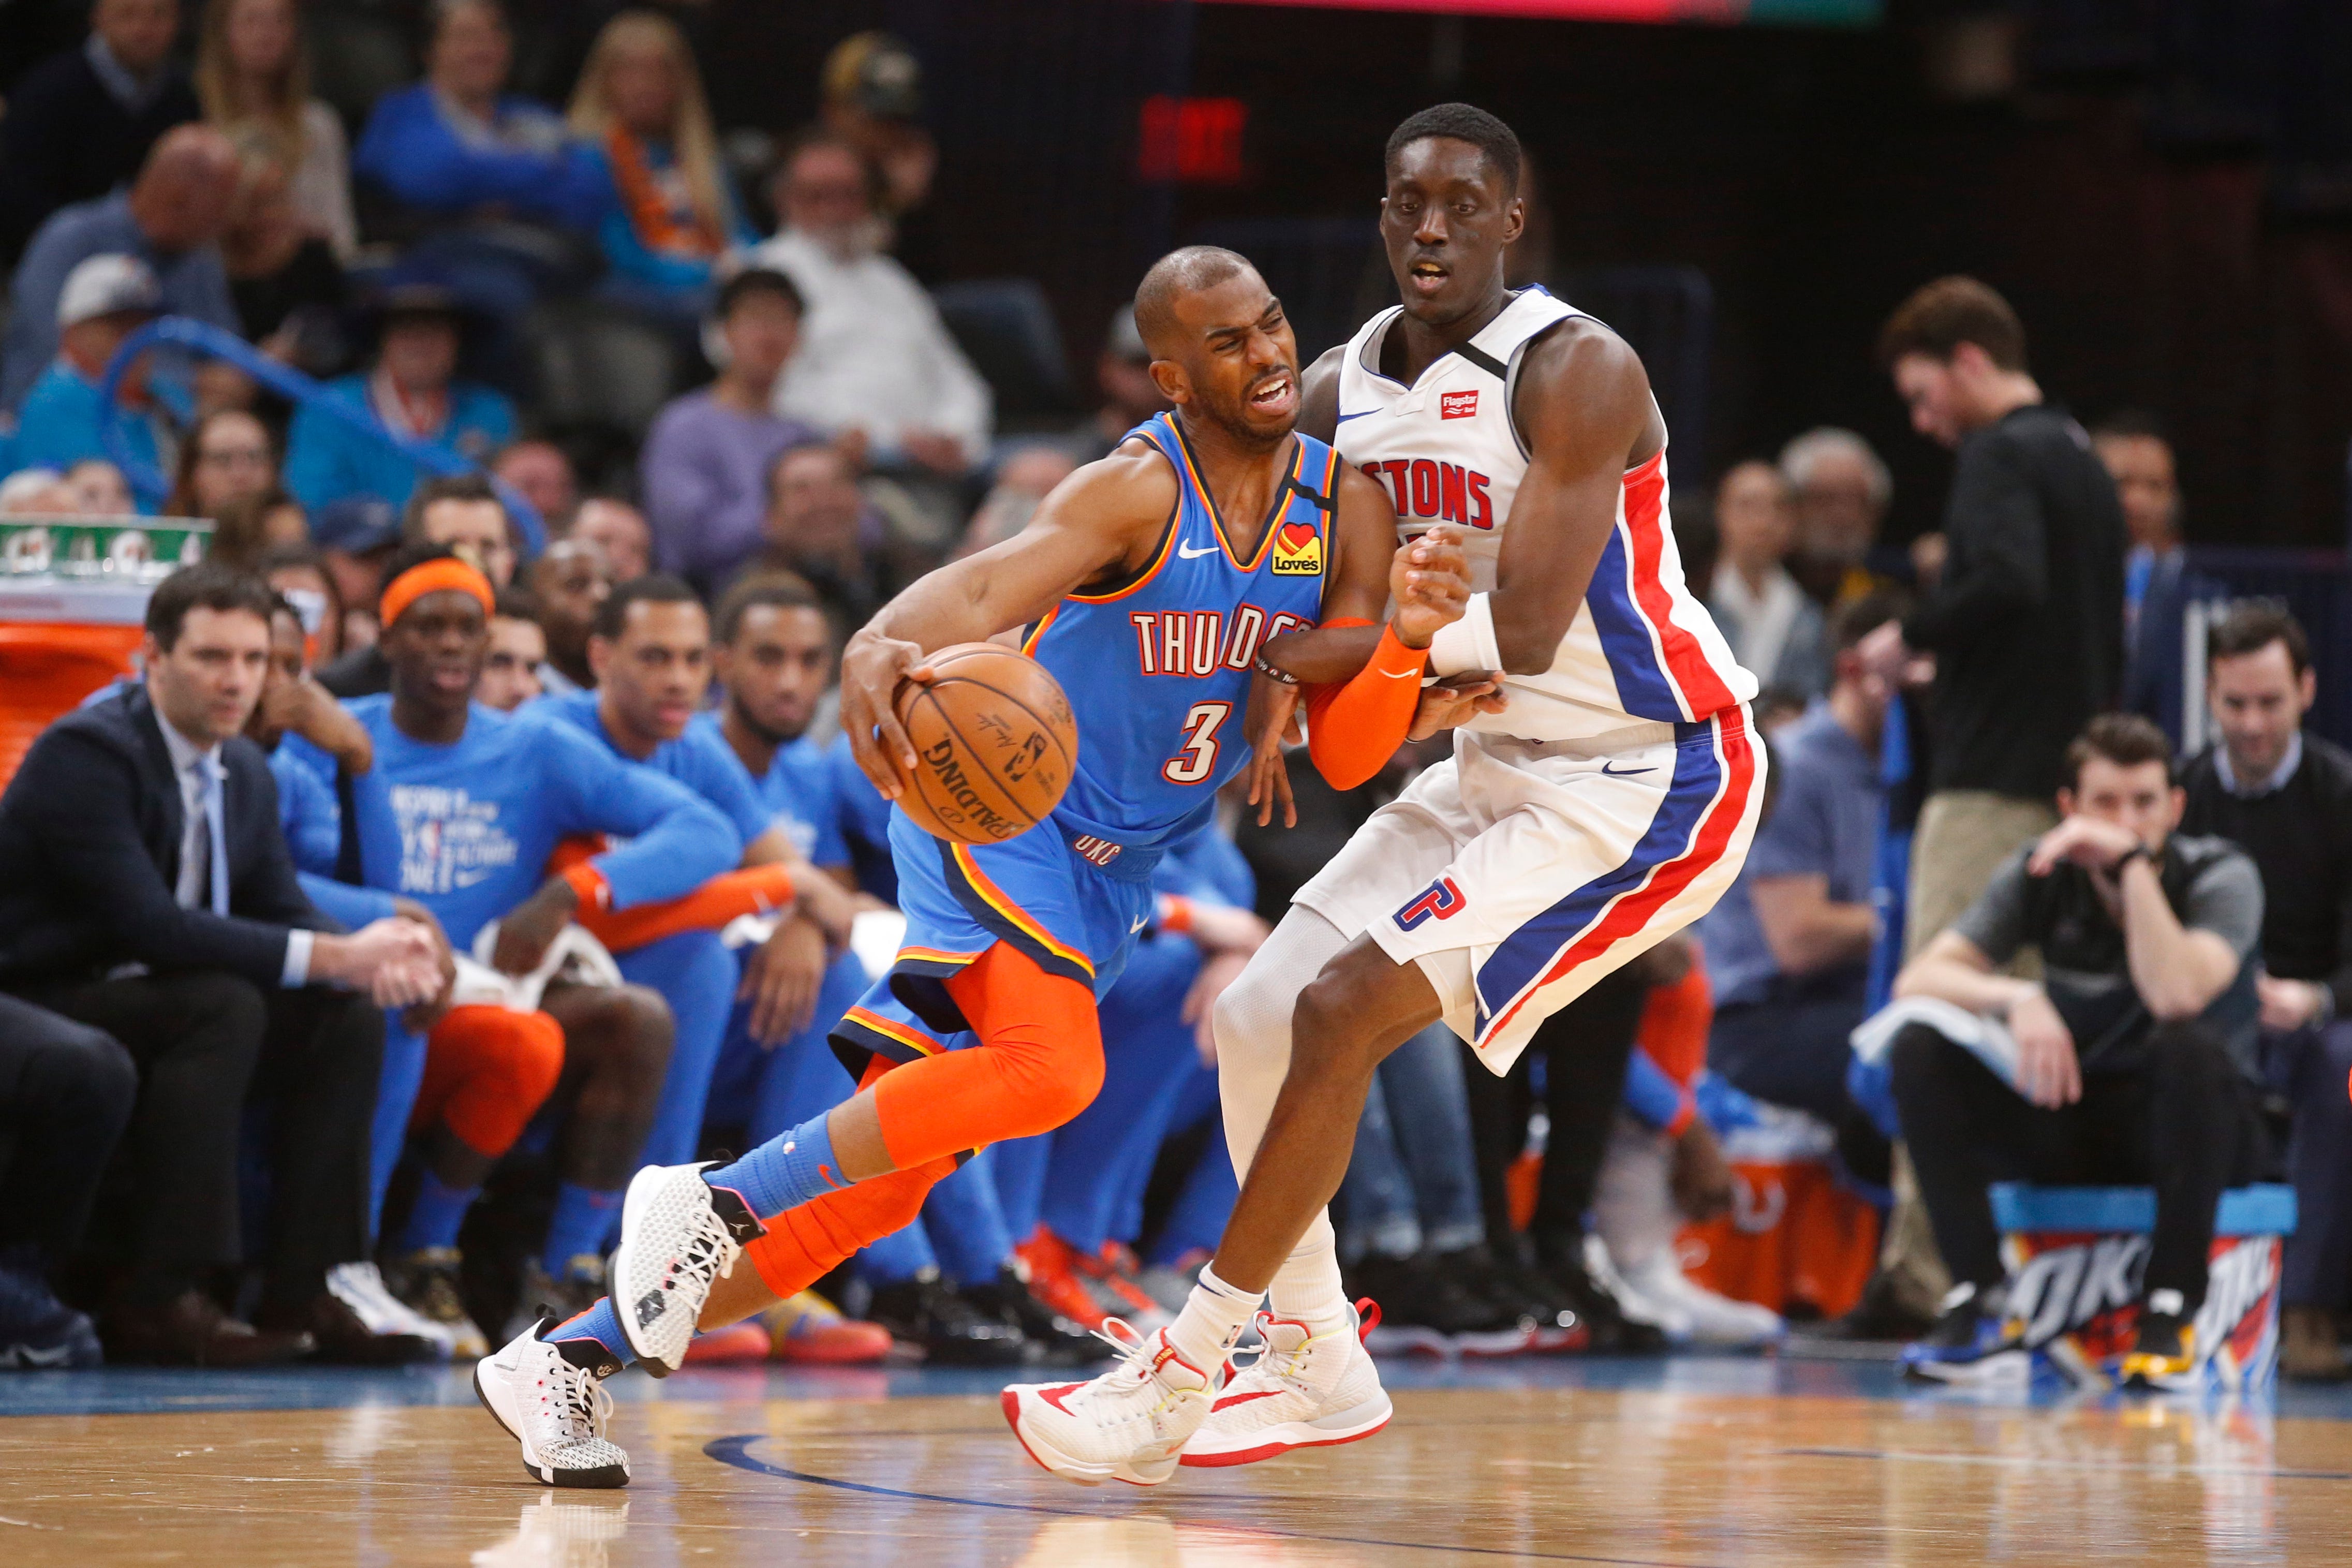 Oklahoma City Thunder guard Chris Paul (3) drives around Detroit Pistons forward Tony Snell during the first half of an NBA basketball game.